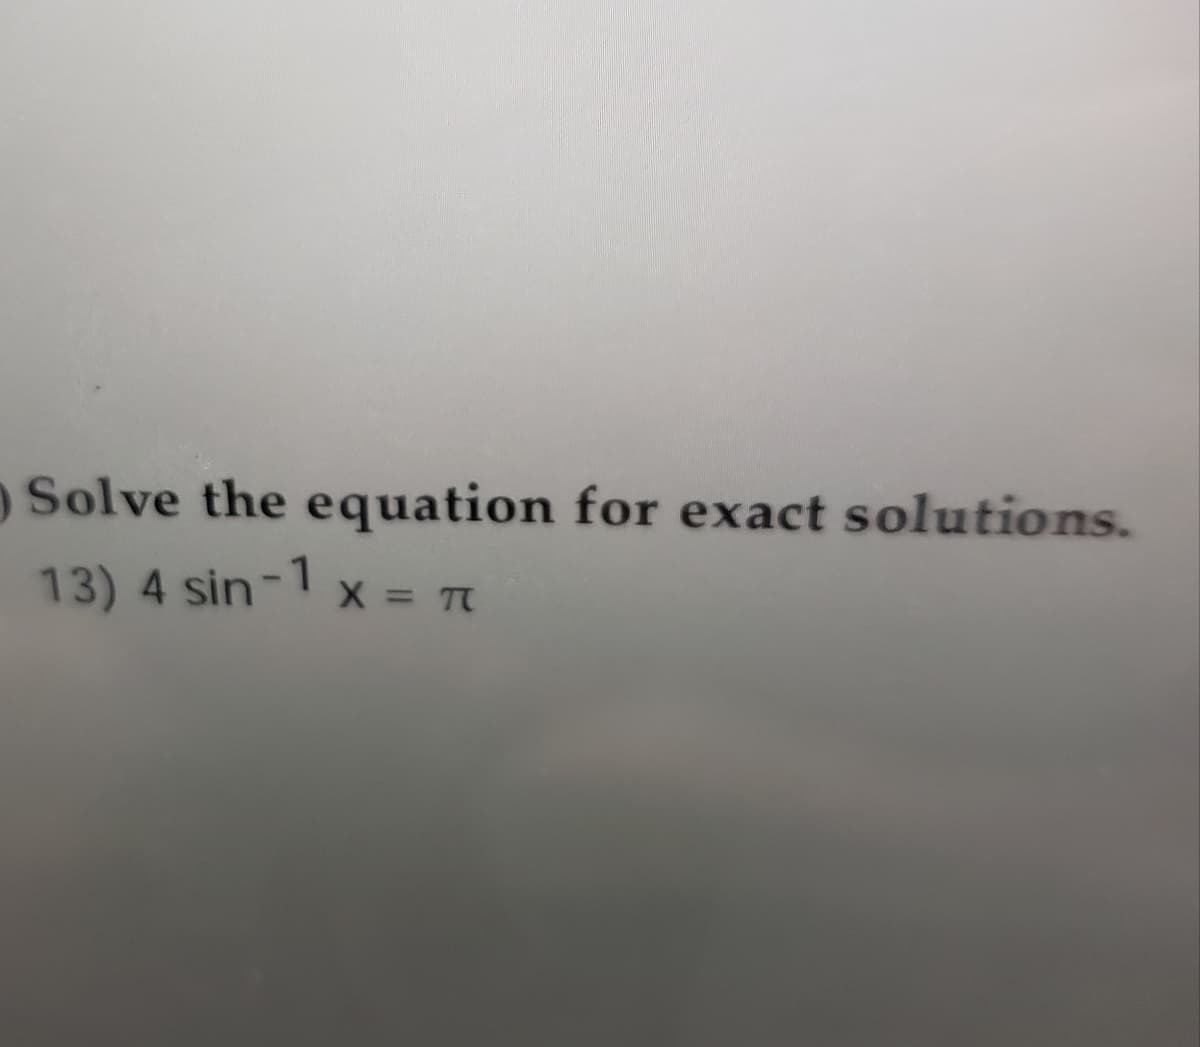 O Solve the equation for exact solutions.
13) 4 sin-1 x = T
